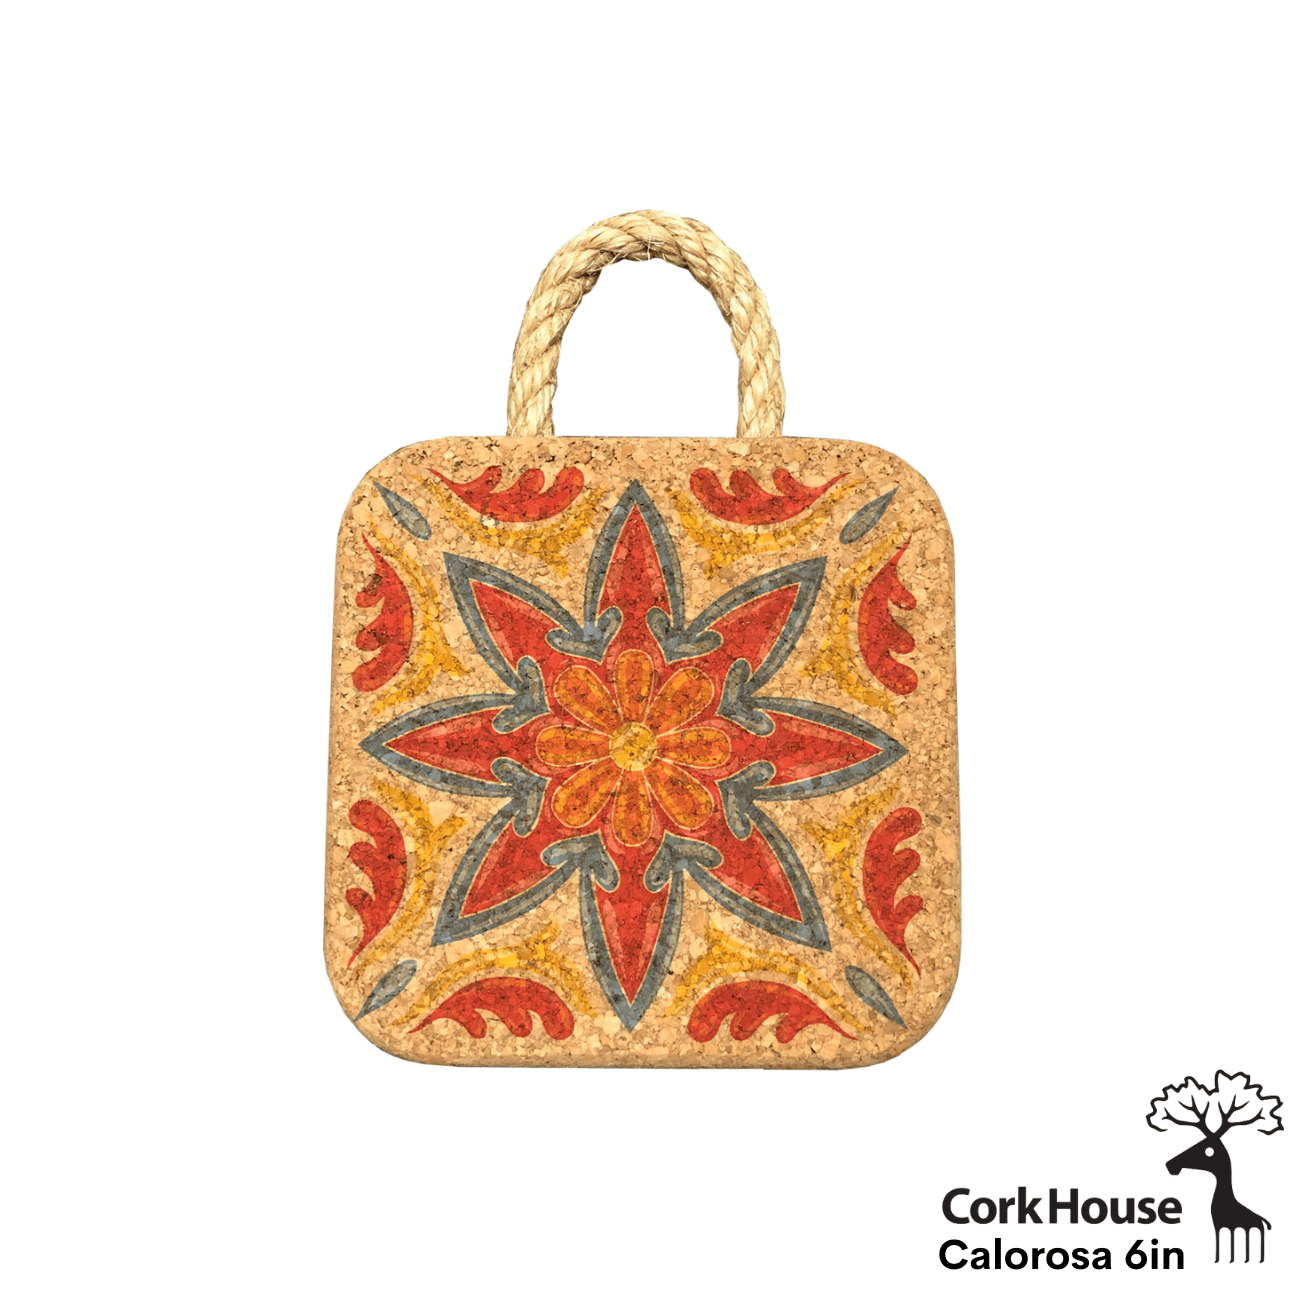 The calorosa 6in hot pad features a tile pattern with an 8 point red and orange flower outlined in a green/blue color with matching leaves around the edge of the hop had.